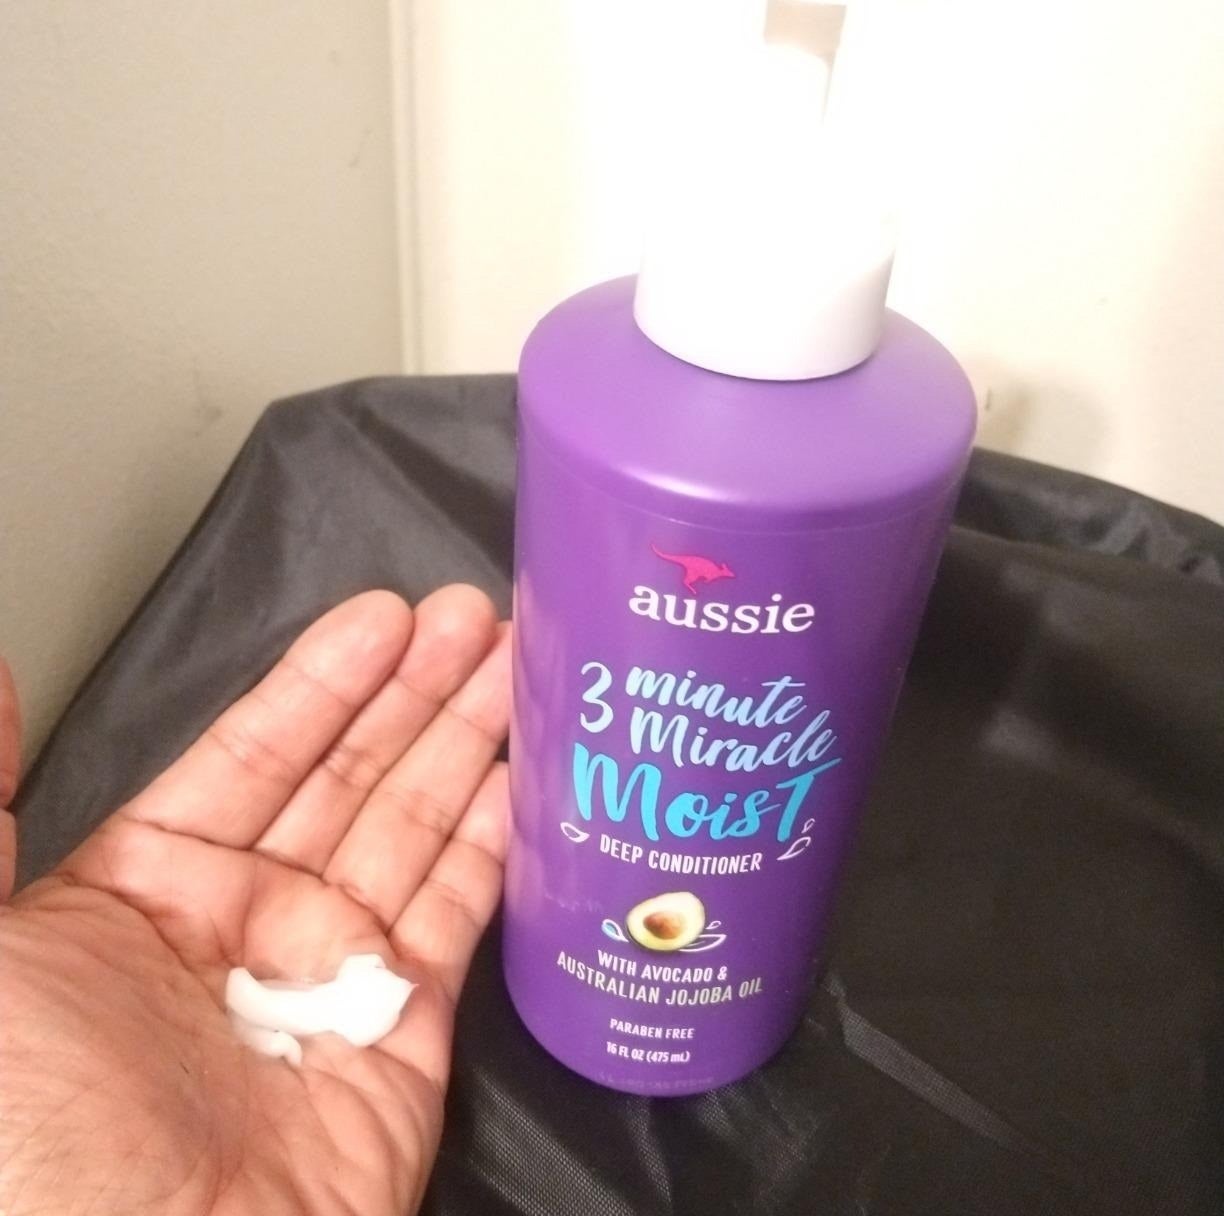 a hand next to the bottle holding a bit of the conditioner